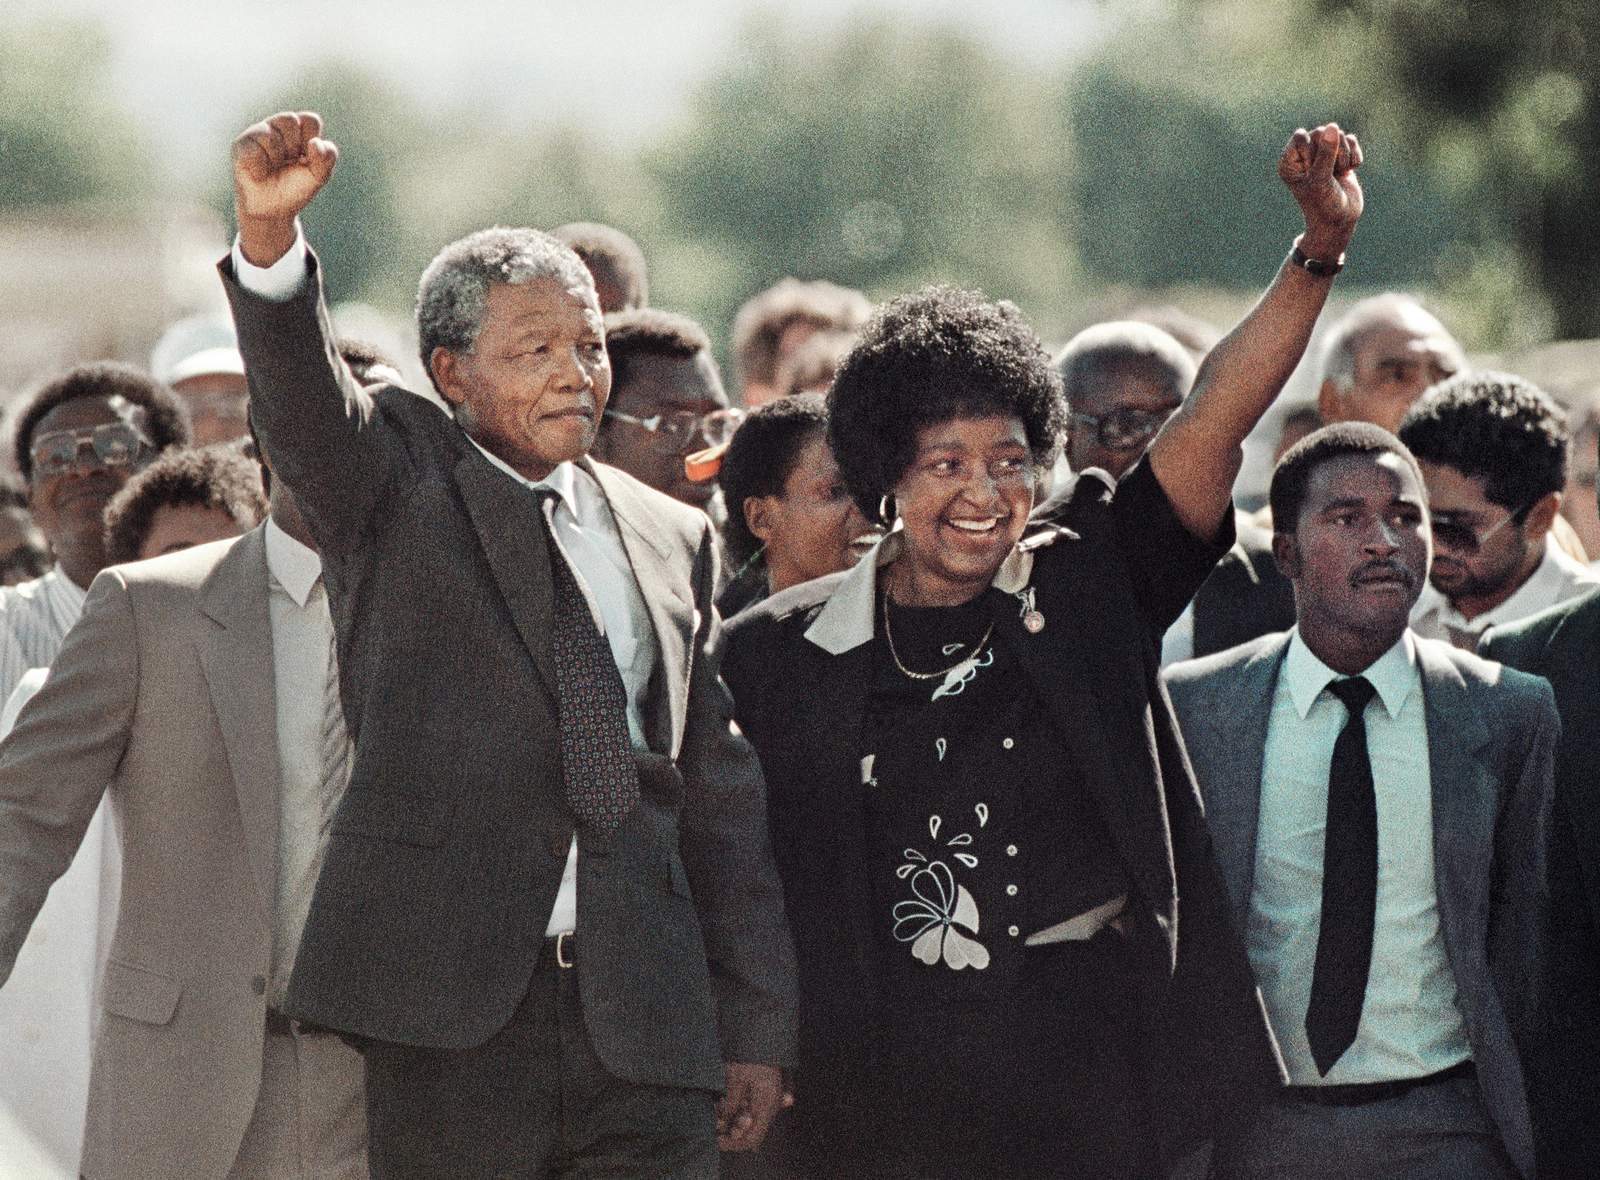 U.S. premiere of Mandela exhibition on view now at Holocaust Museum Houston